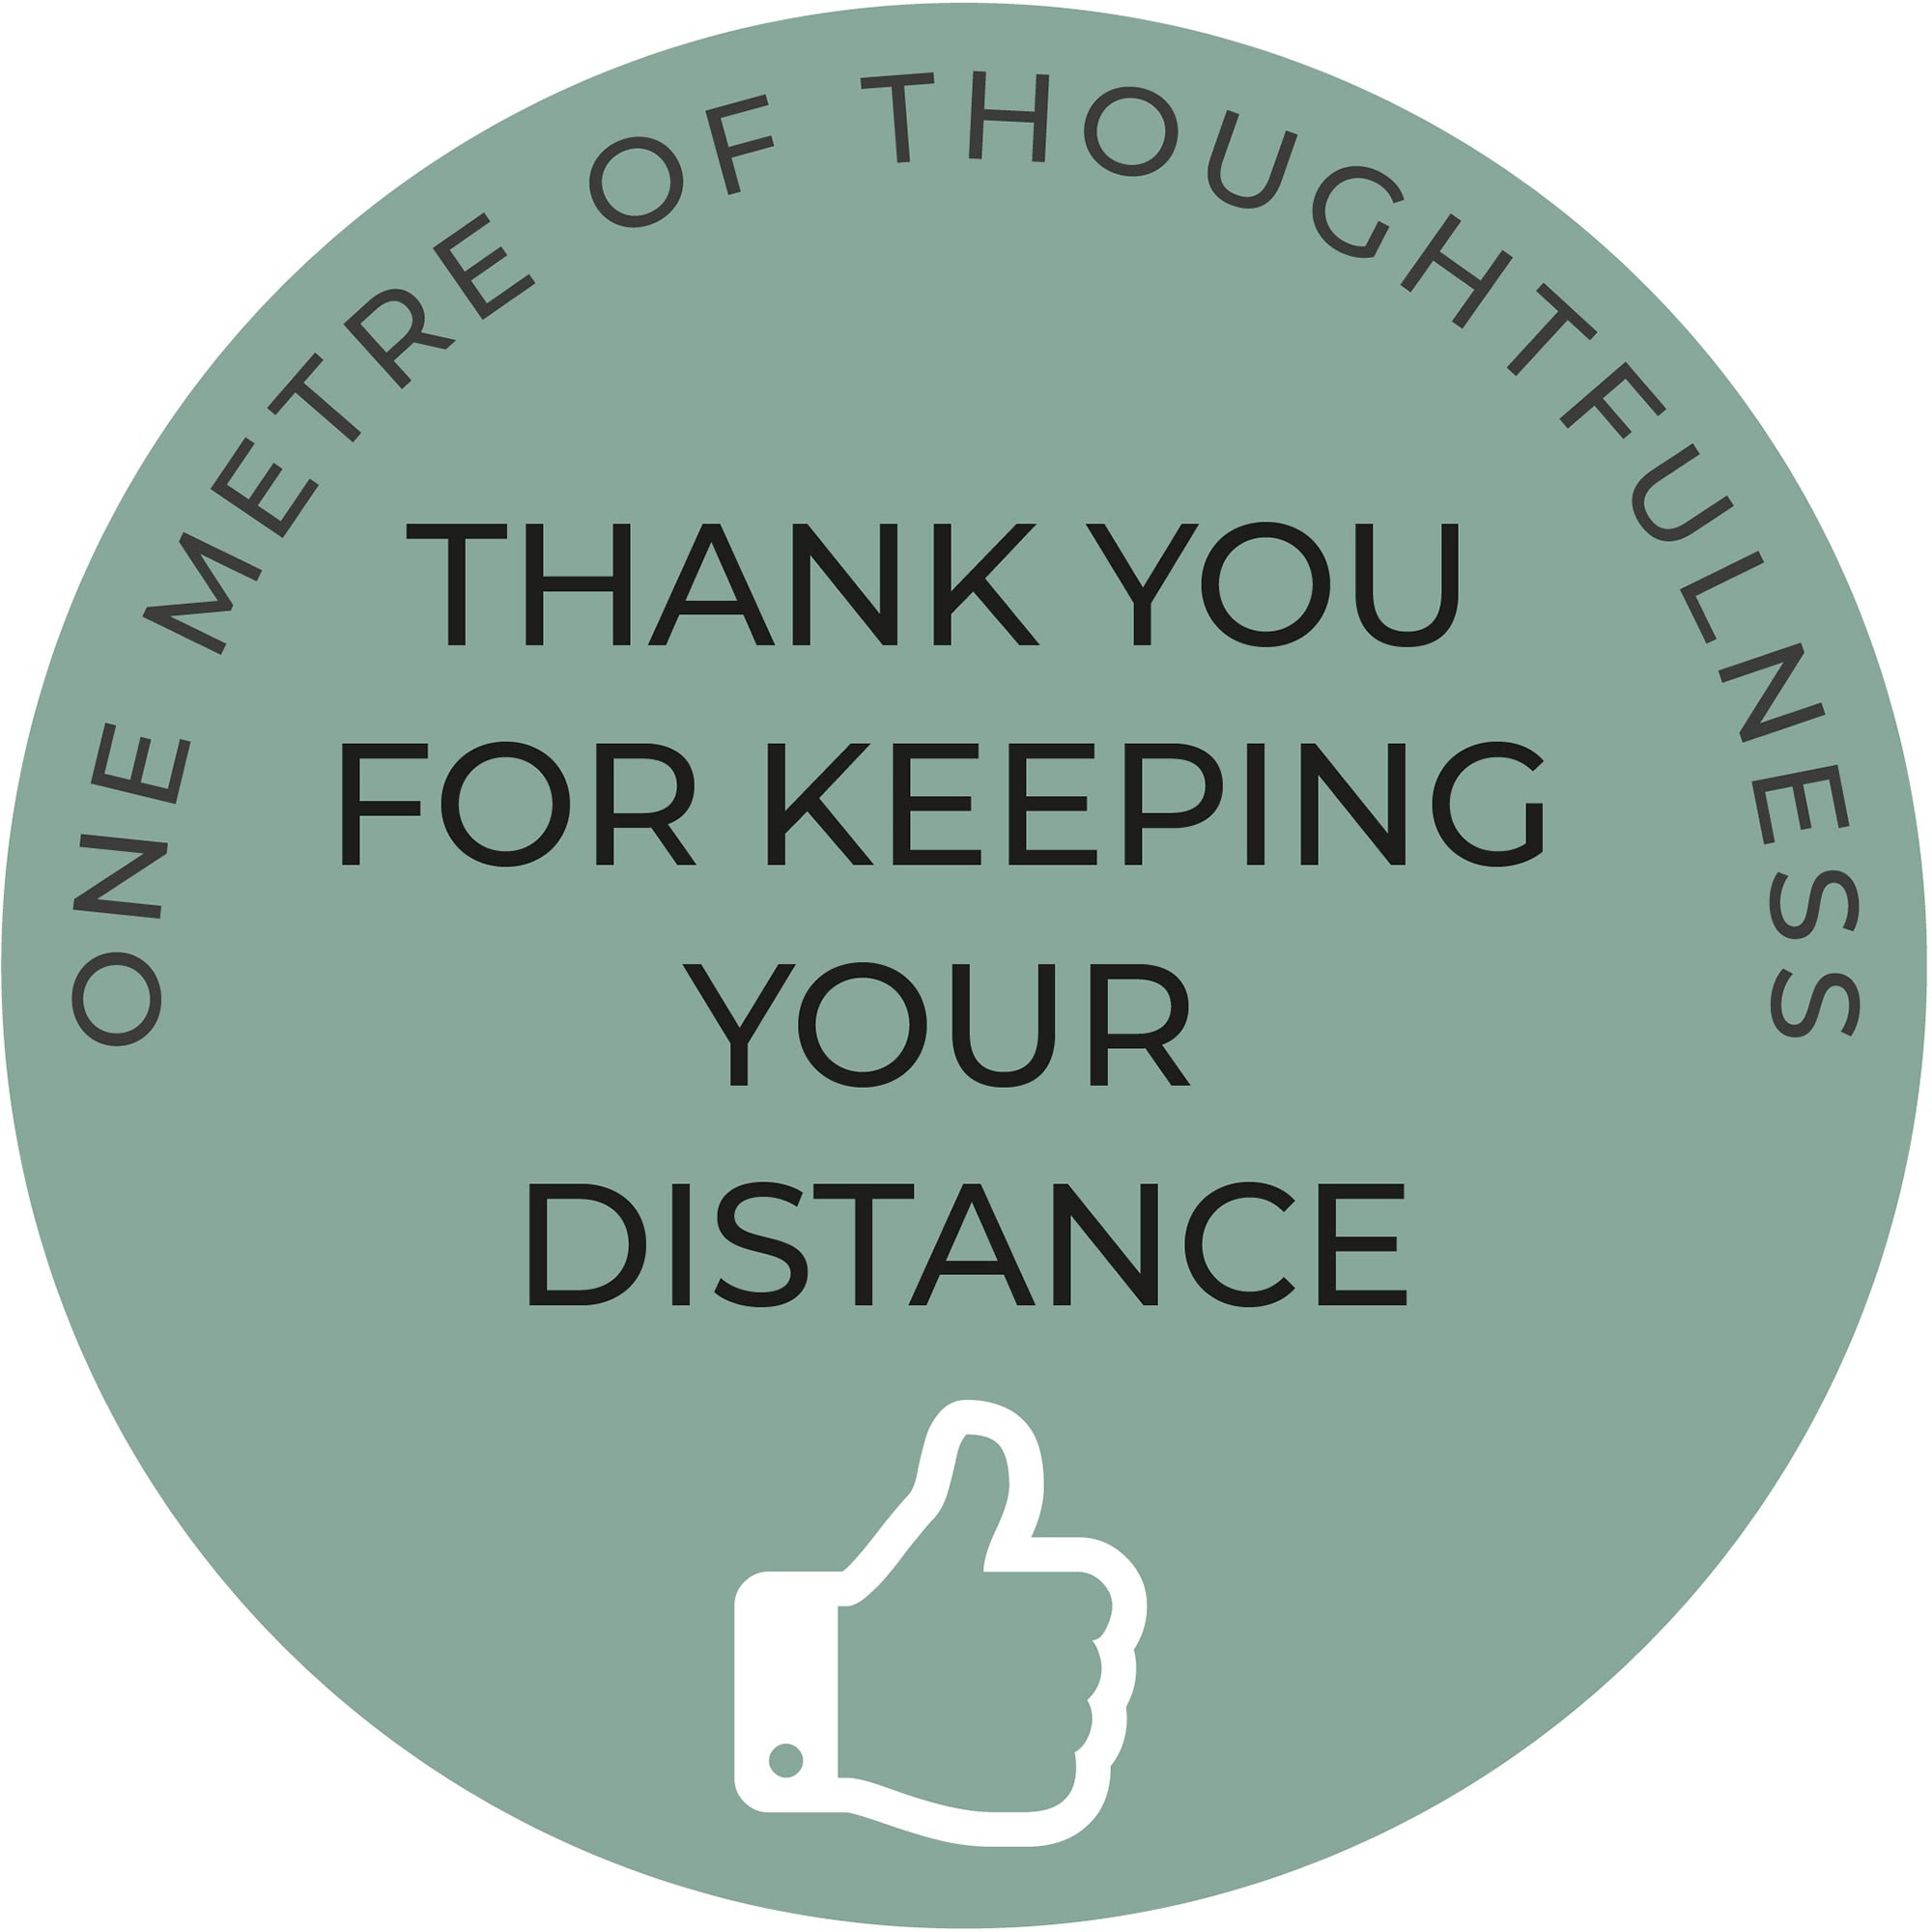 Thank you for keeping your distance